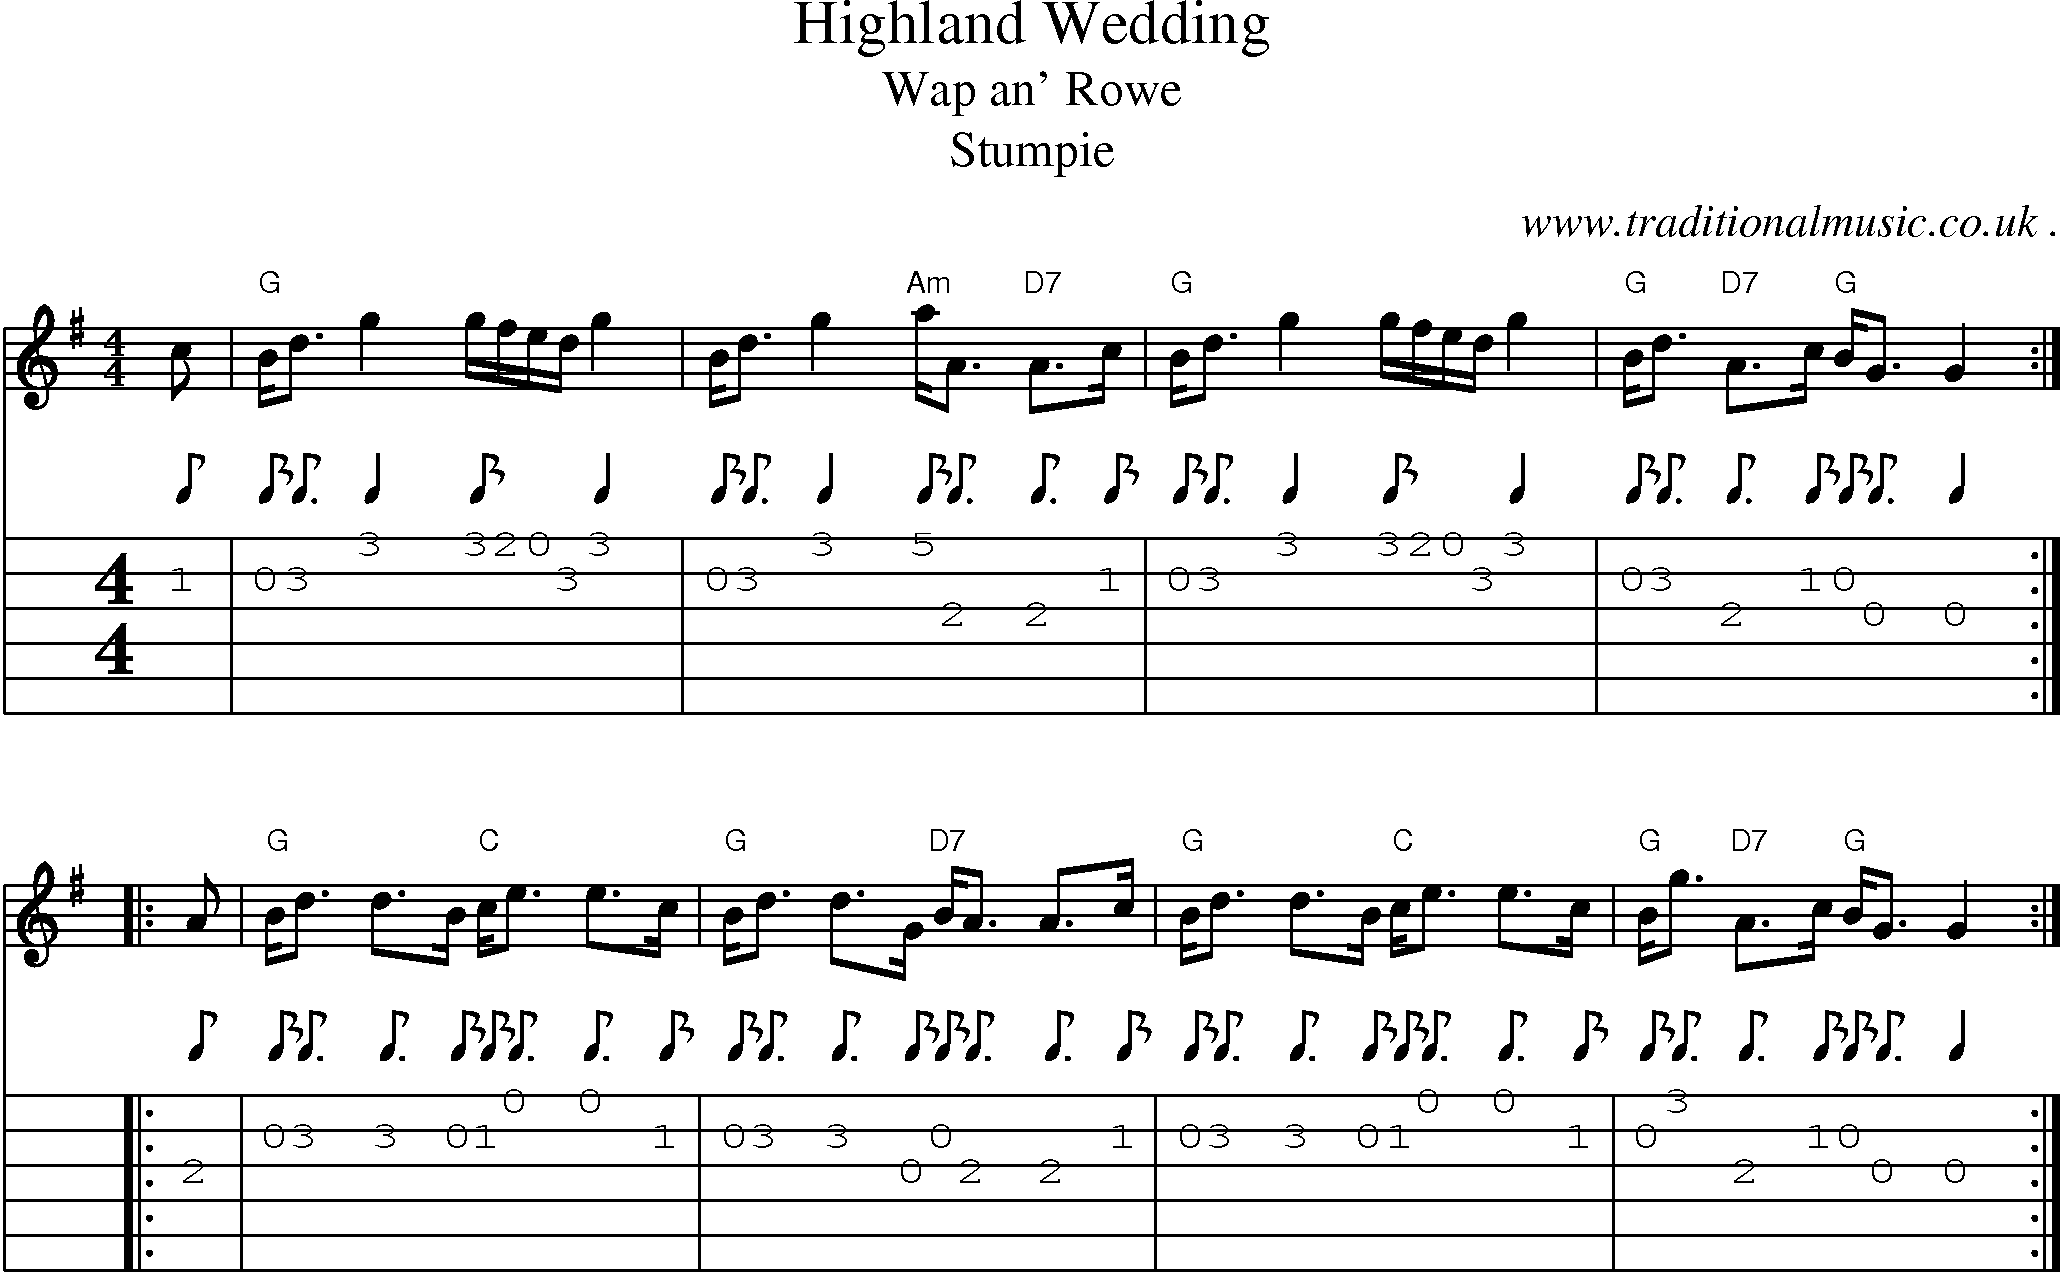 Sheet-music  score, Chords and Guitar Tabs for Highland Wedding